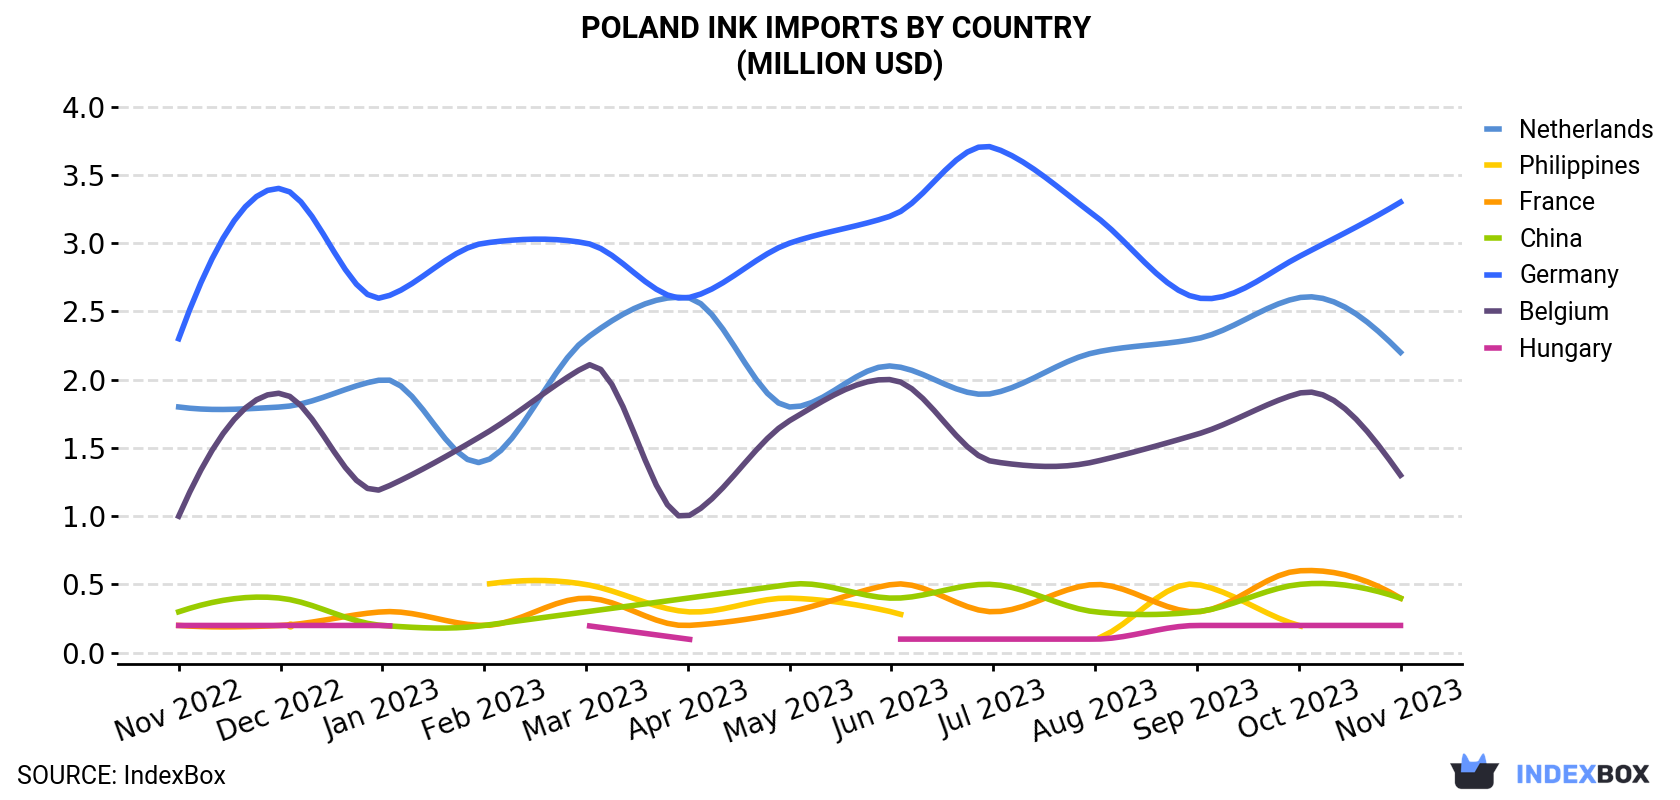 Poland Ink Imports By Country (Million USD)